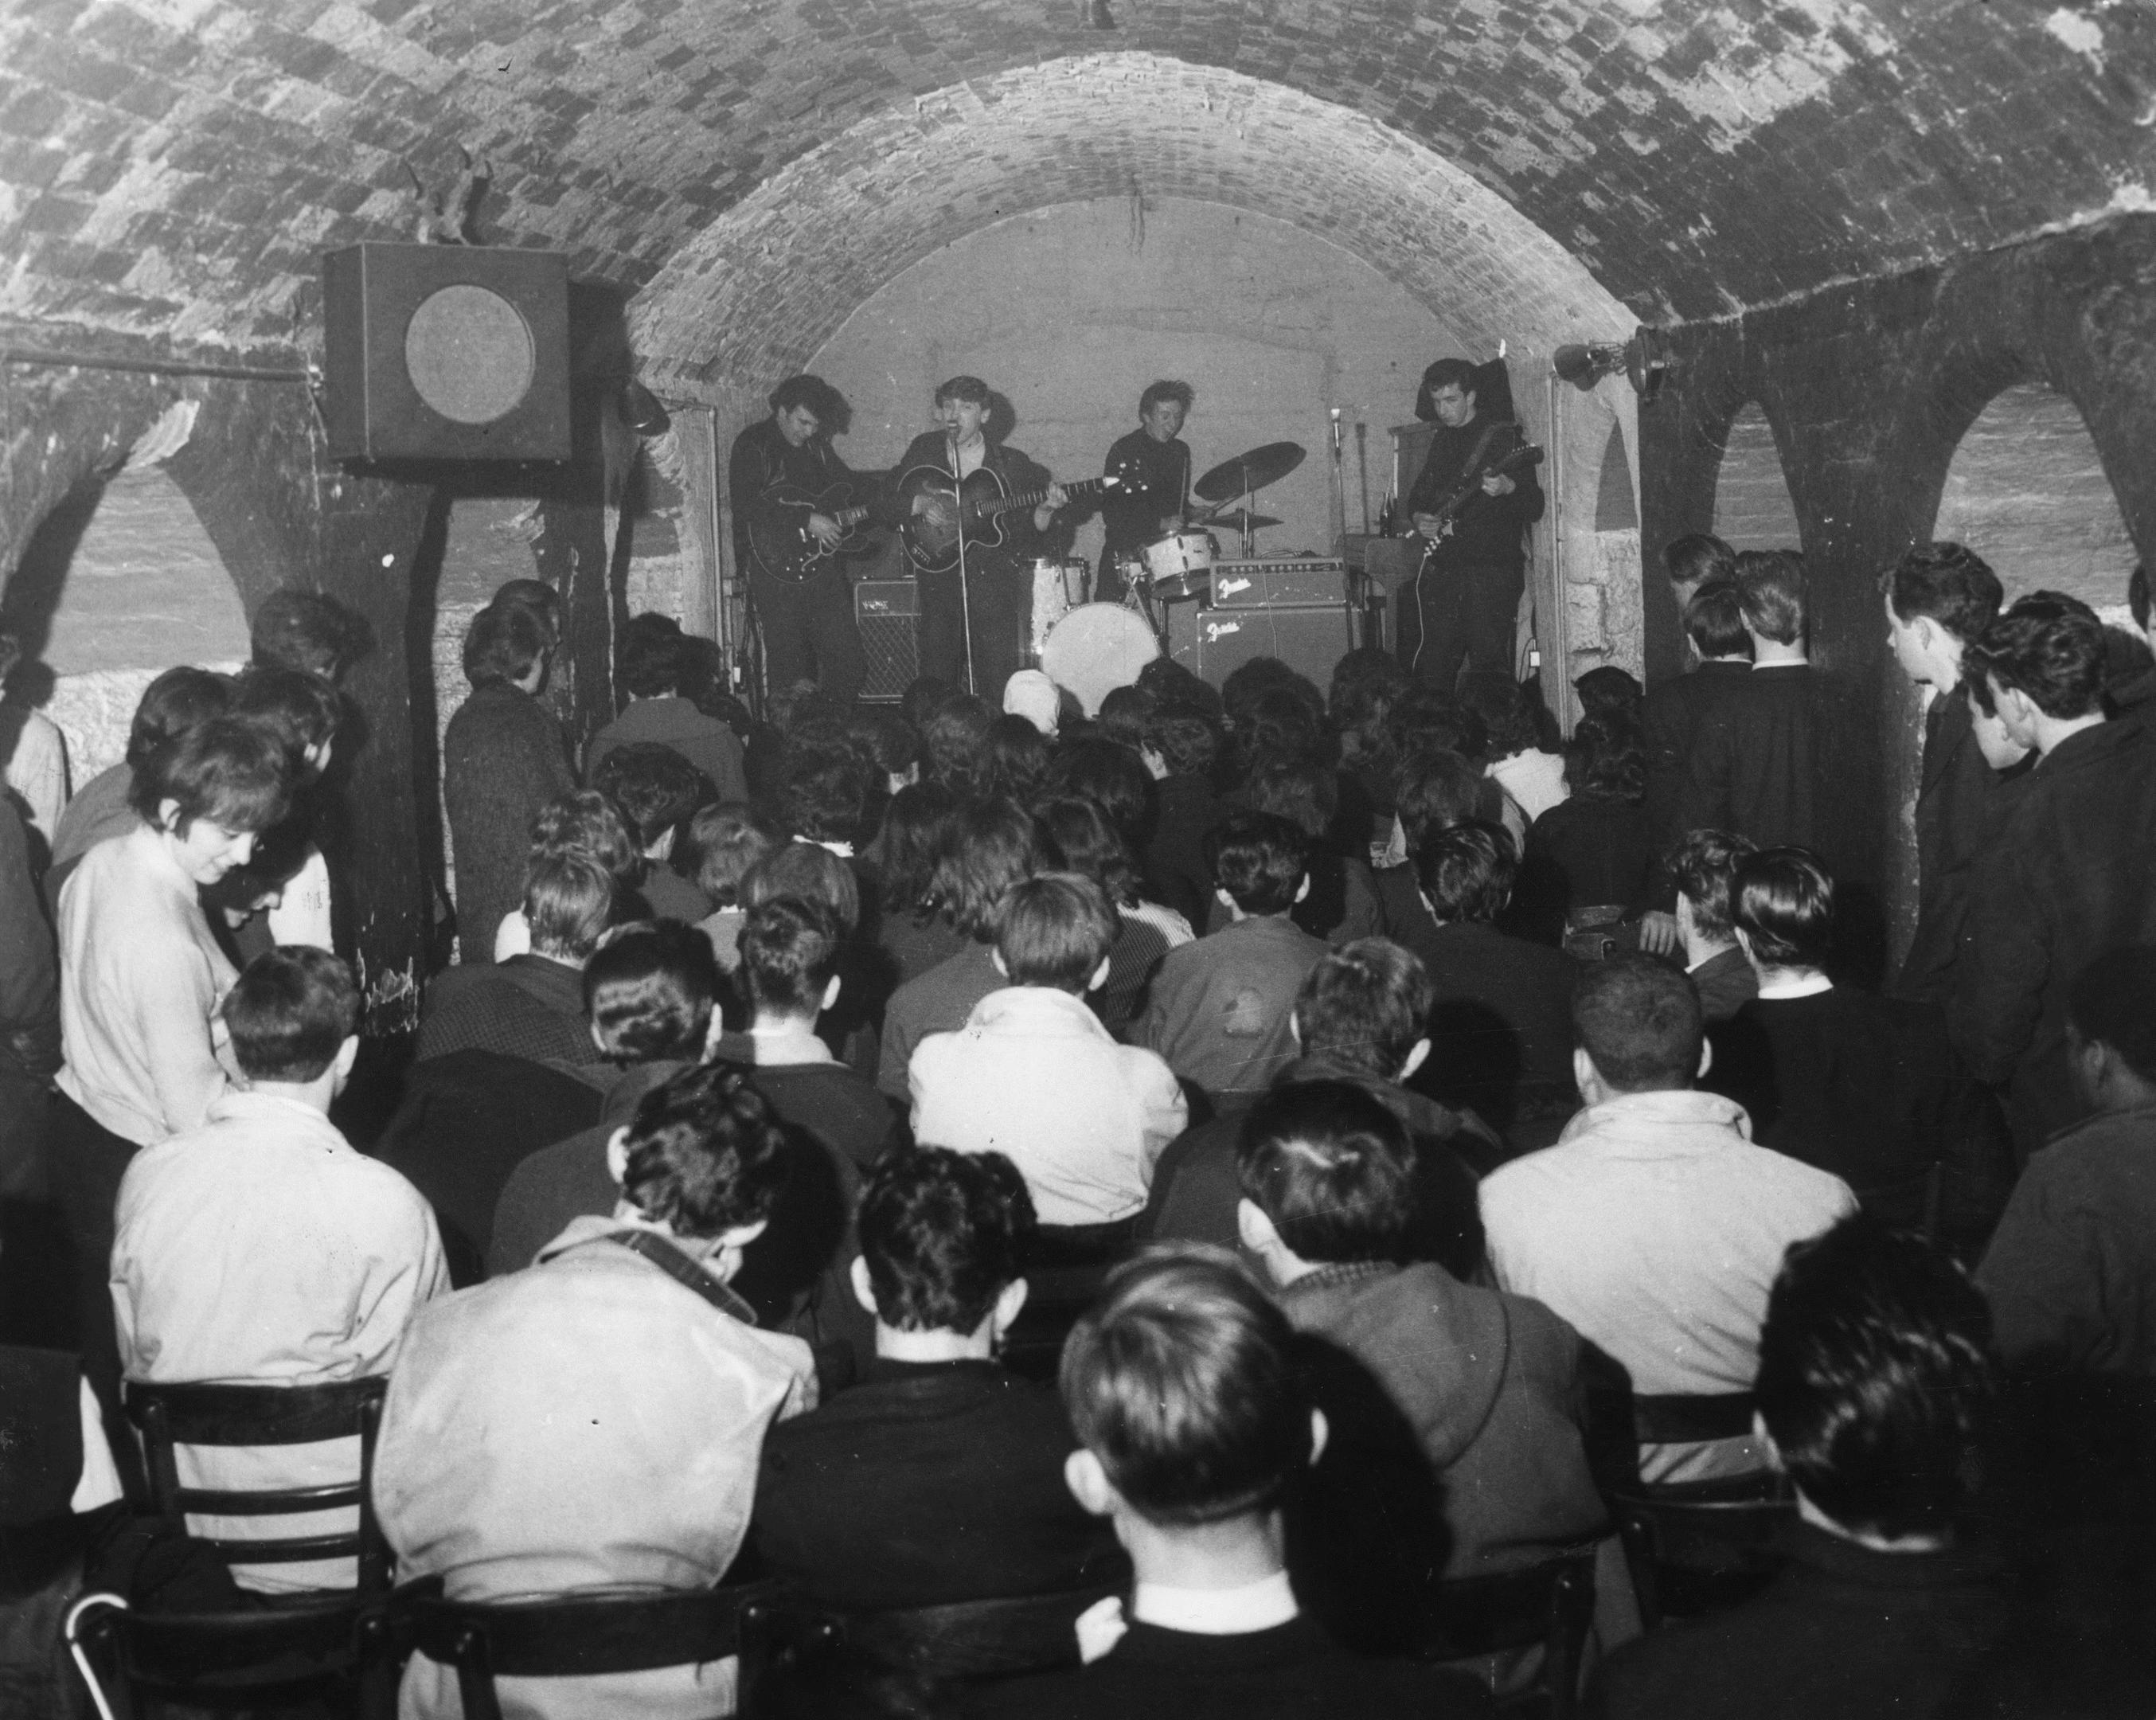 The Merseybeats - named after the musical movement headed by The Beatles - play to a packed Cavern Club audience (Getty Images)